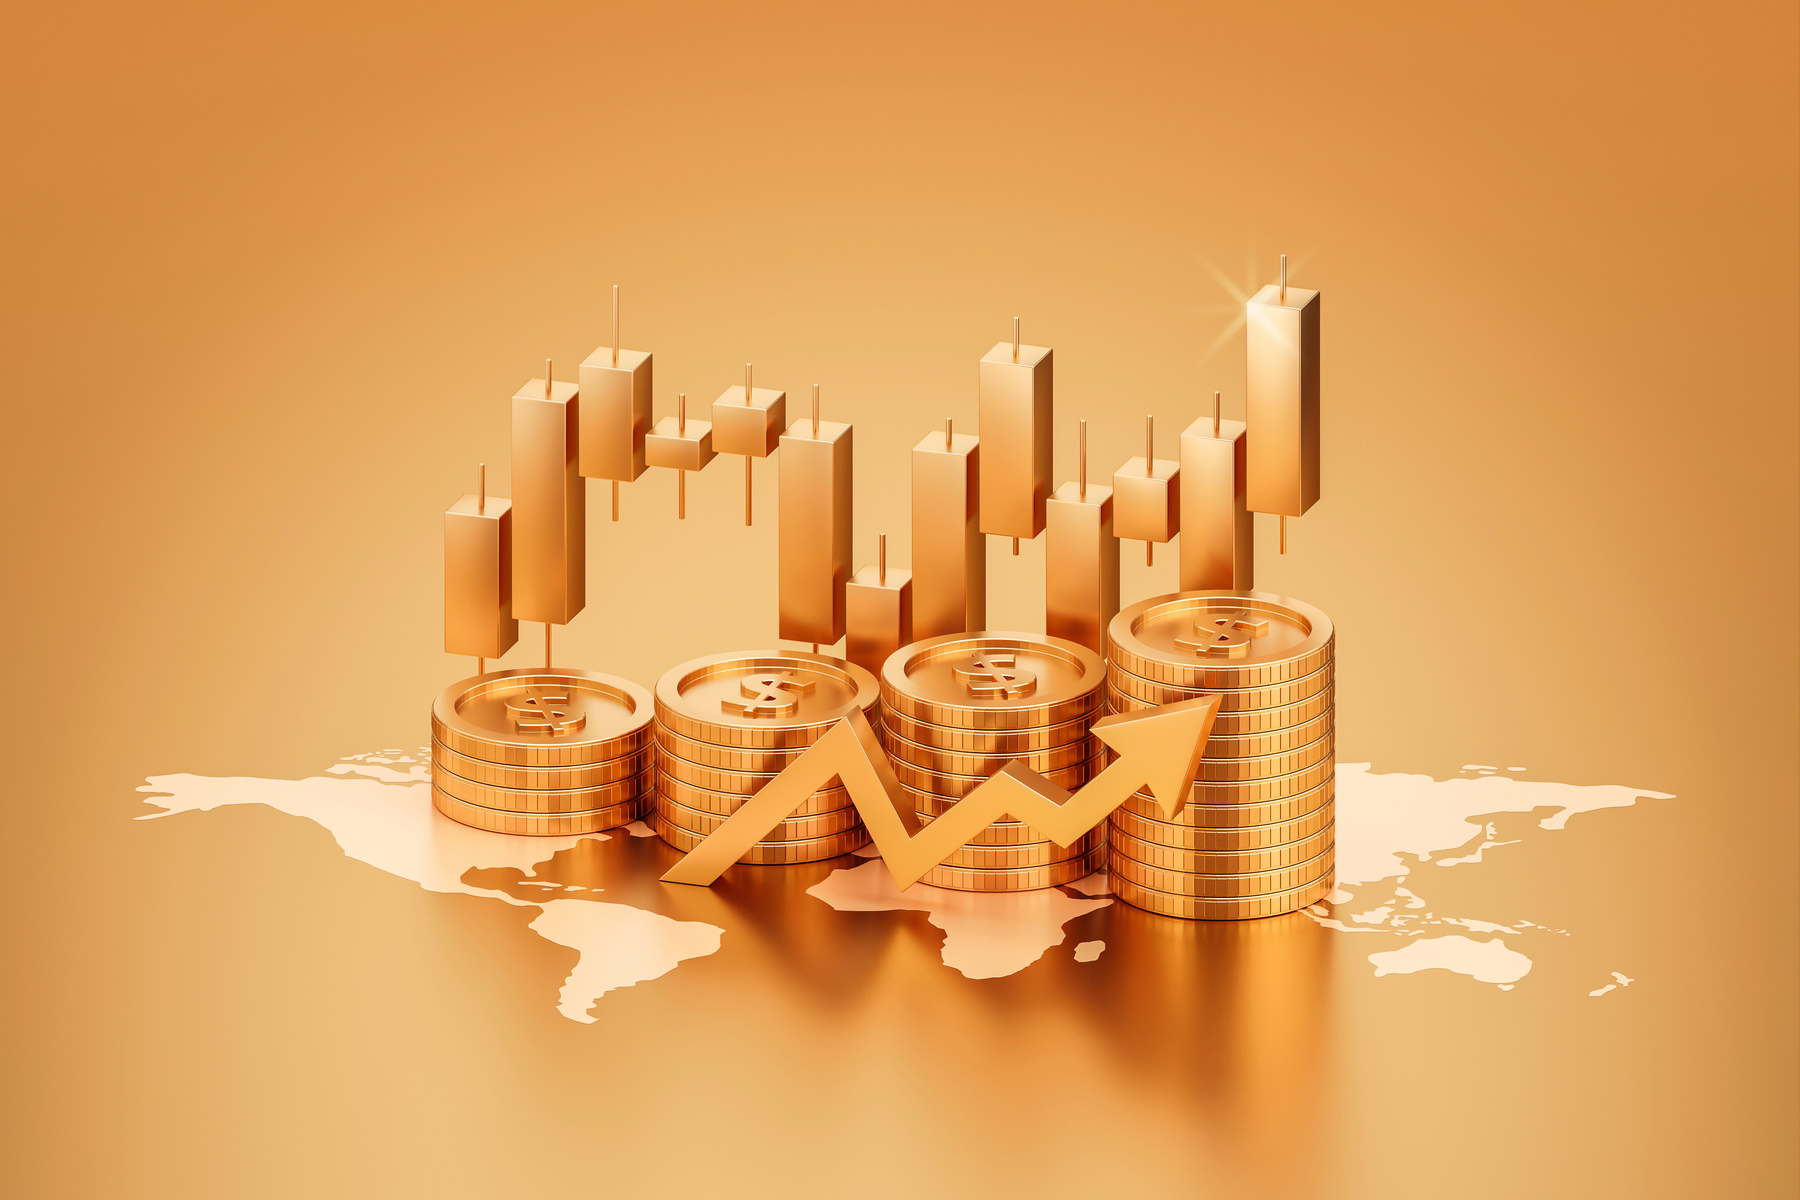 Global gold business investment market stock currency on growth